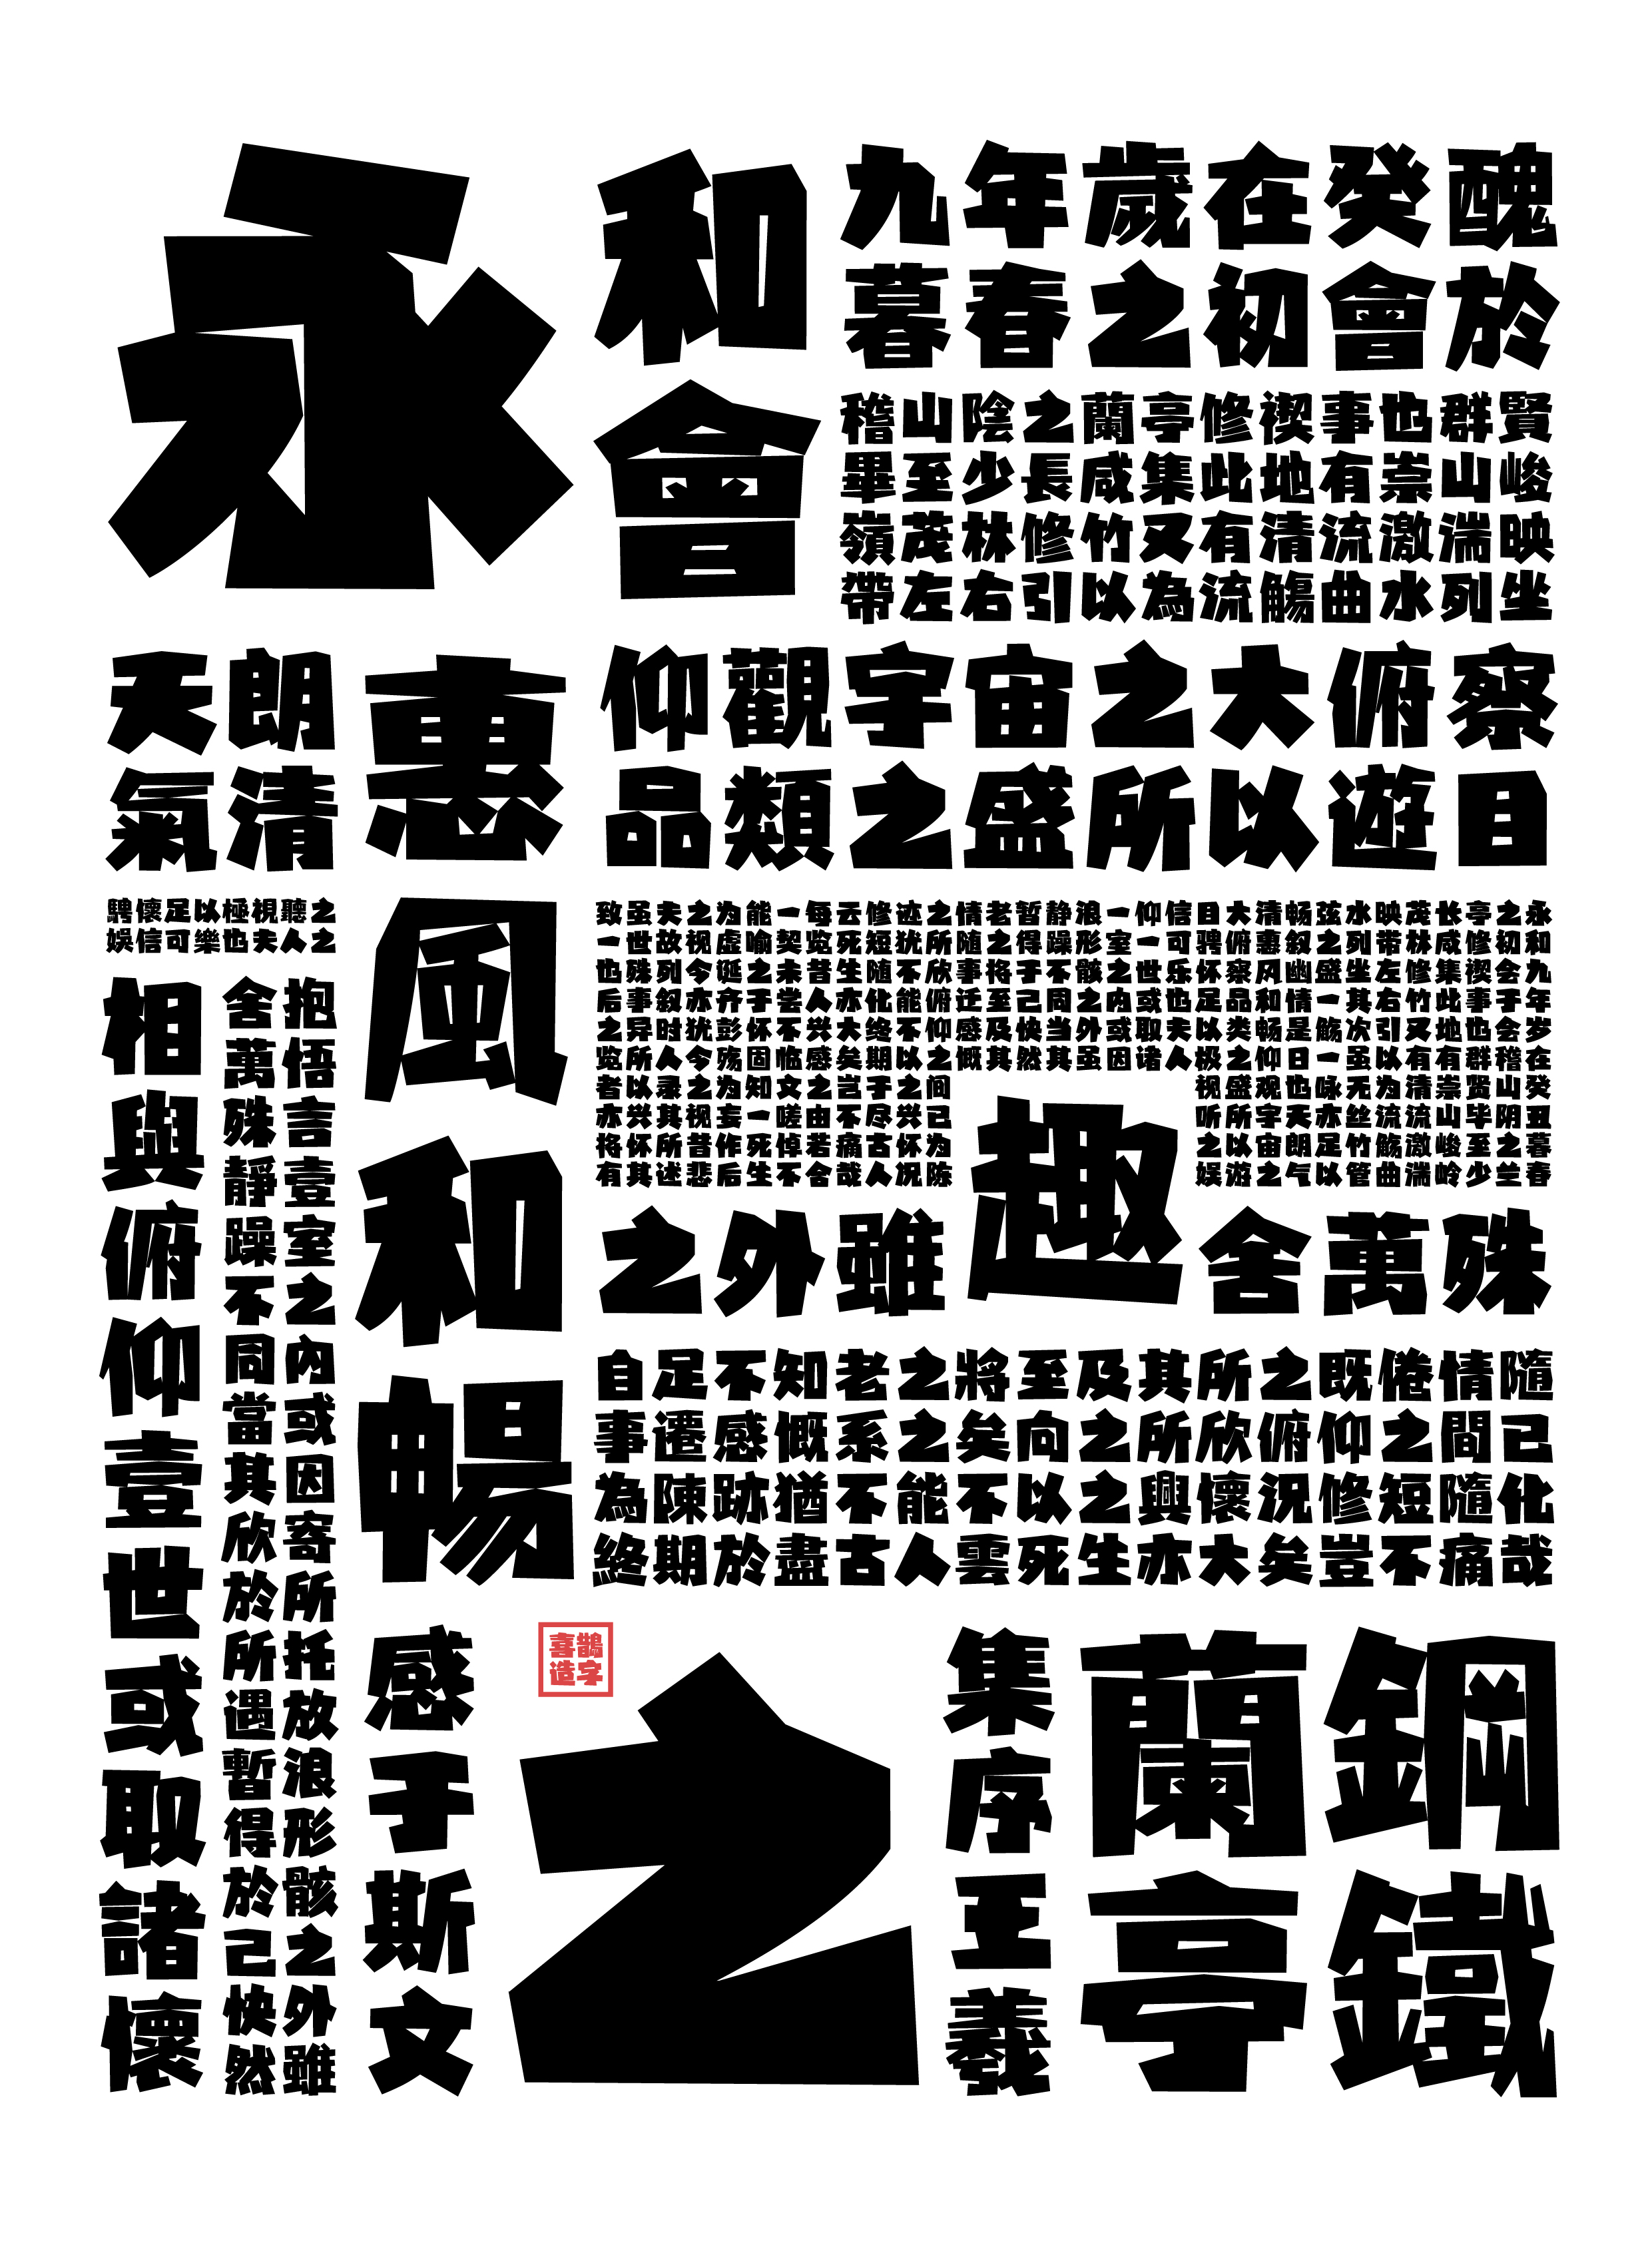 It is very suitable for various Chinese style text or headline scenes, posters and headlines.